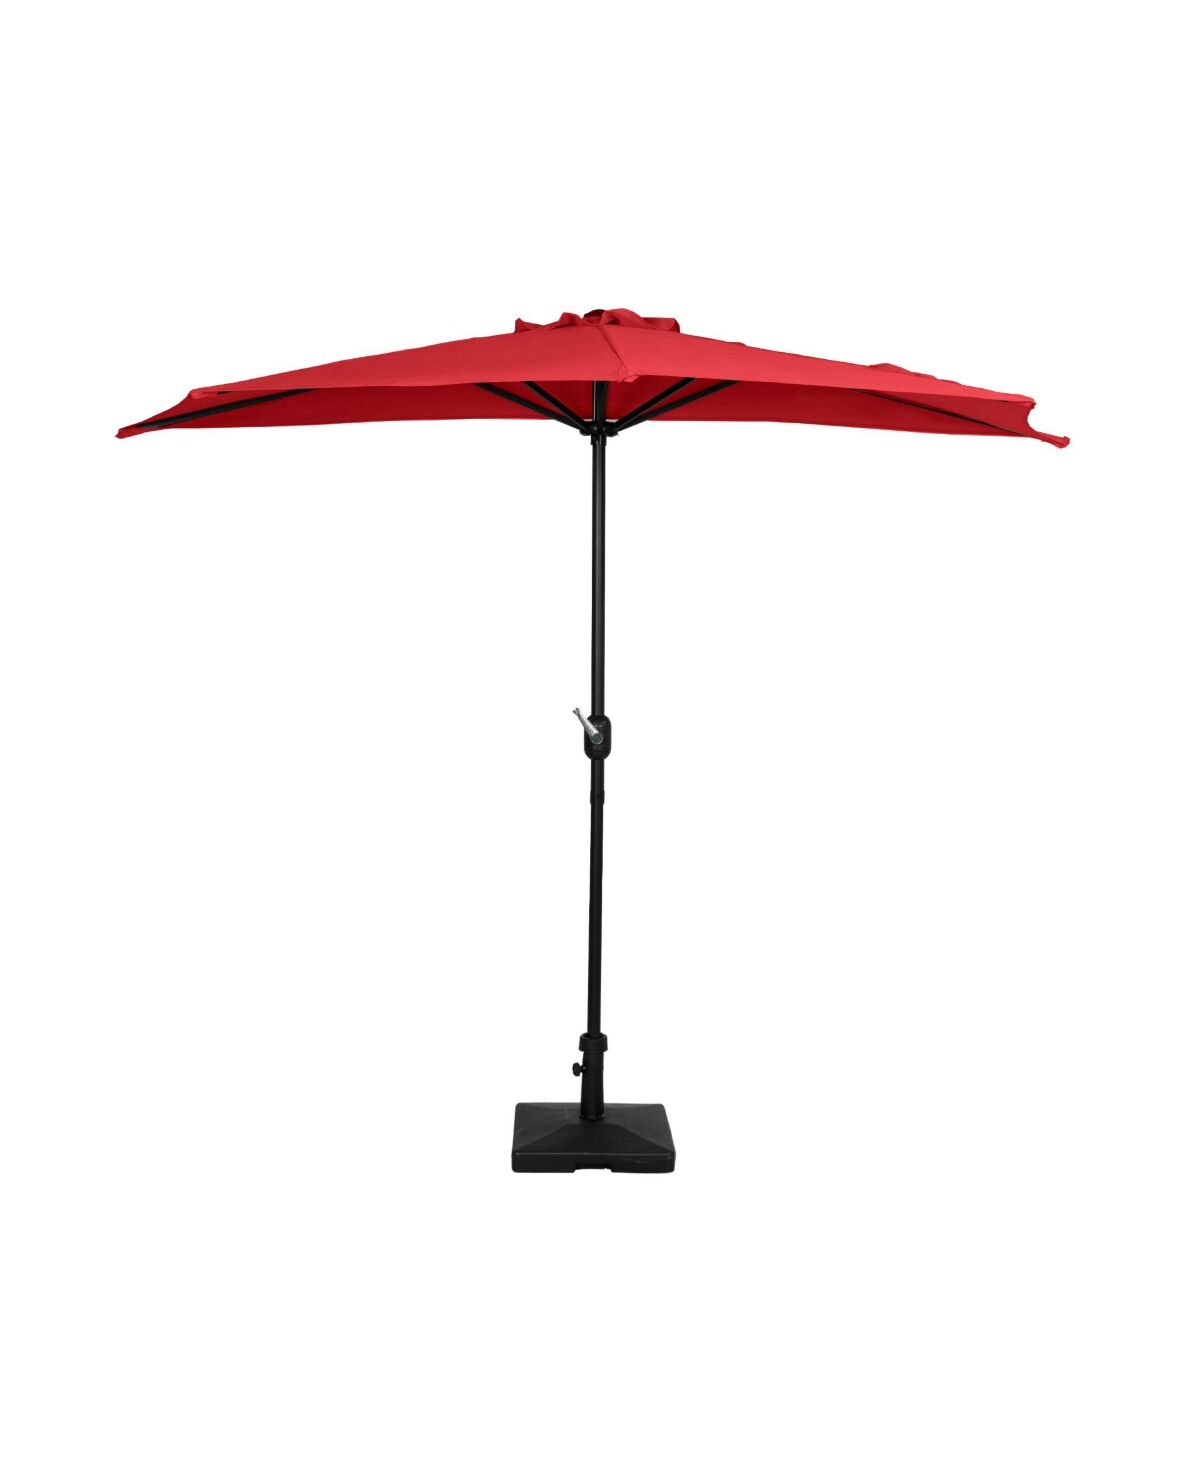 WestinTrends 9 Ft Outdoor Patio Half Market Umbrella with Concrete Weight Base Set - Red